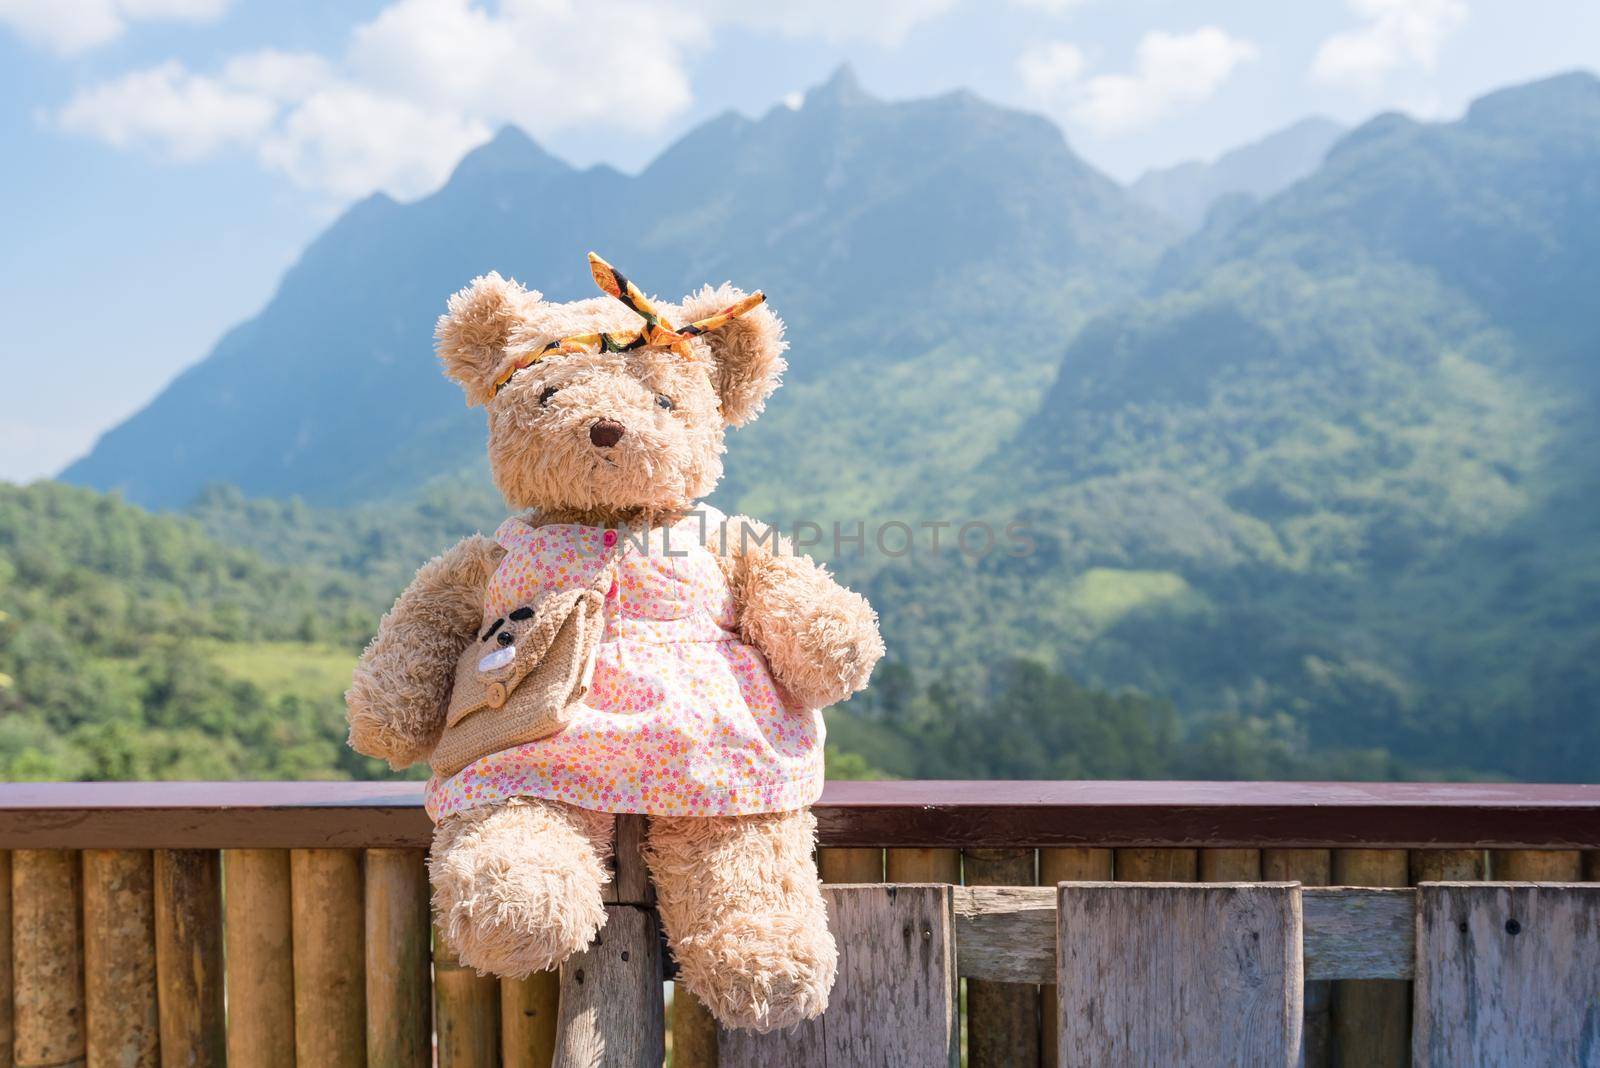 Bear doll sitting and relax in the morning time with nature mountain view in background 